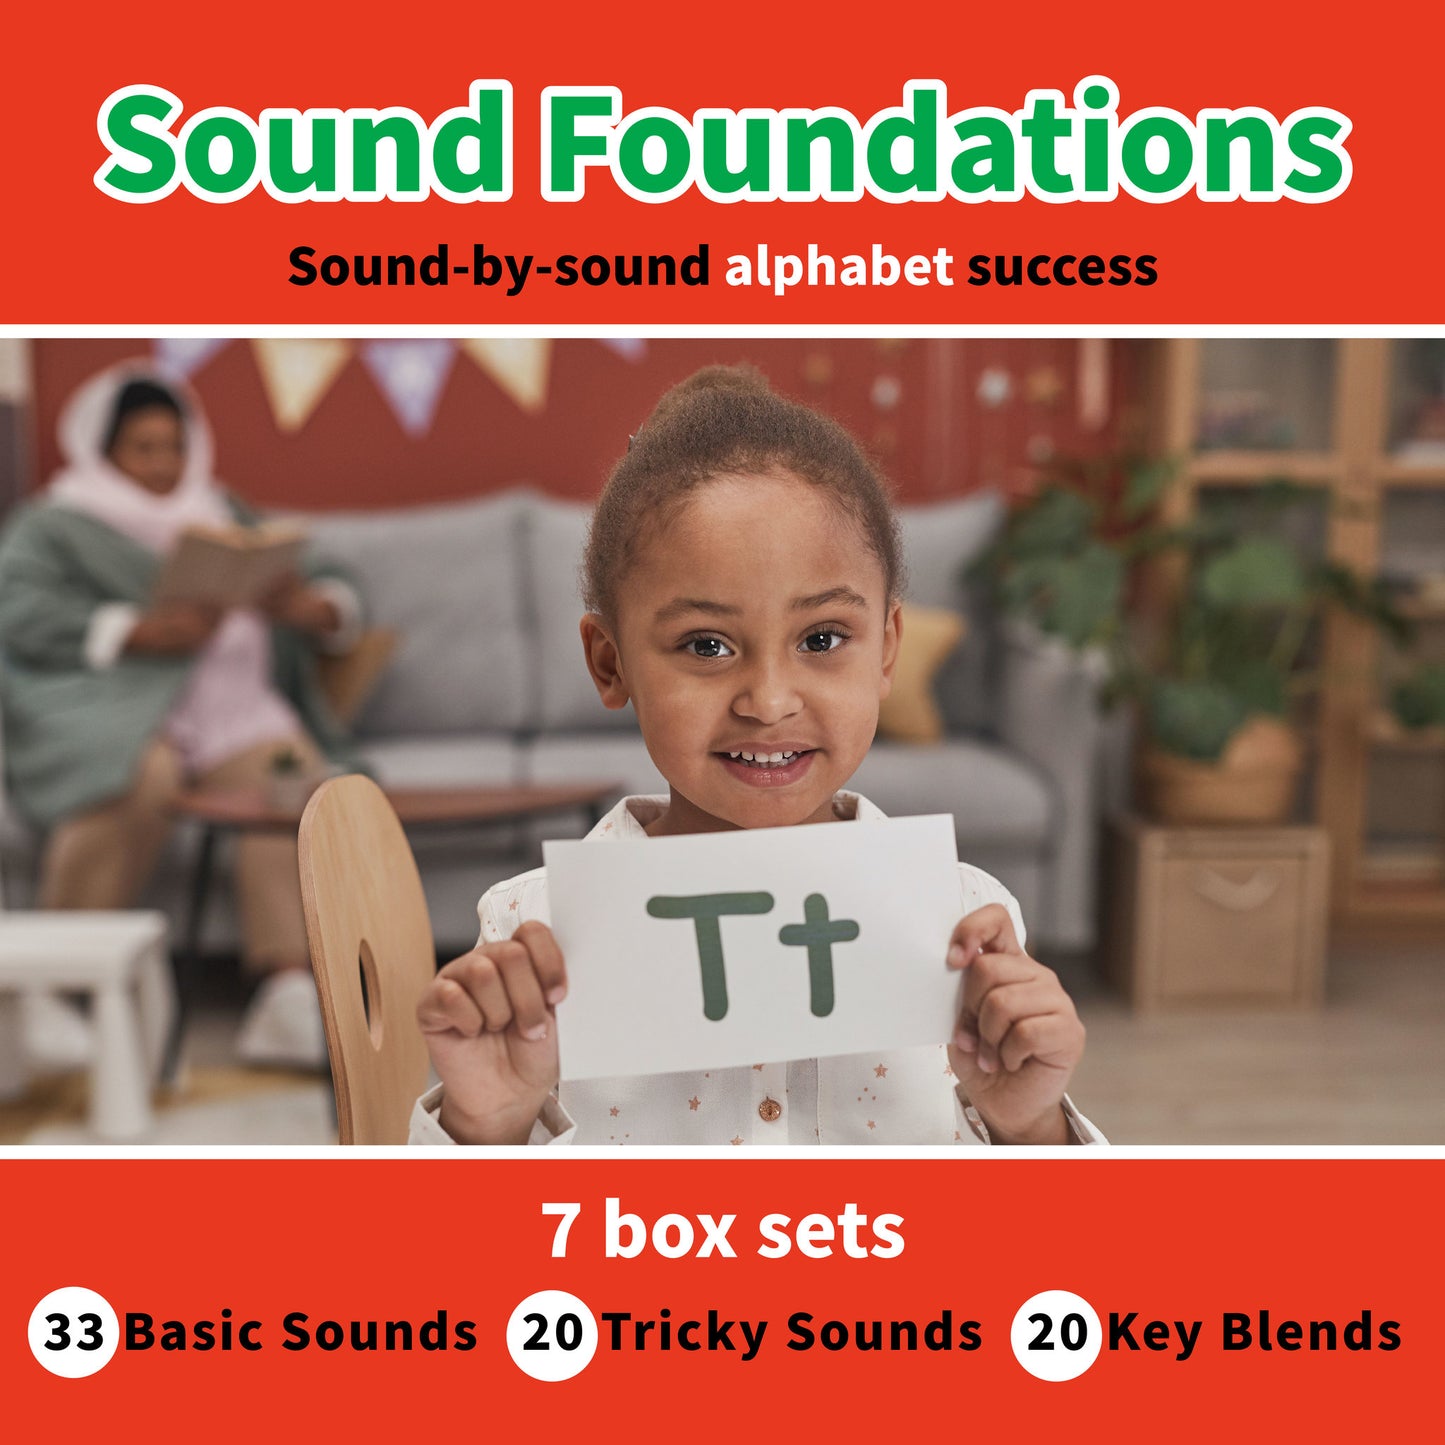 Sound Foundations 1: Let's Learn the Sound / Core Consonants